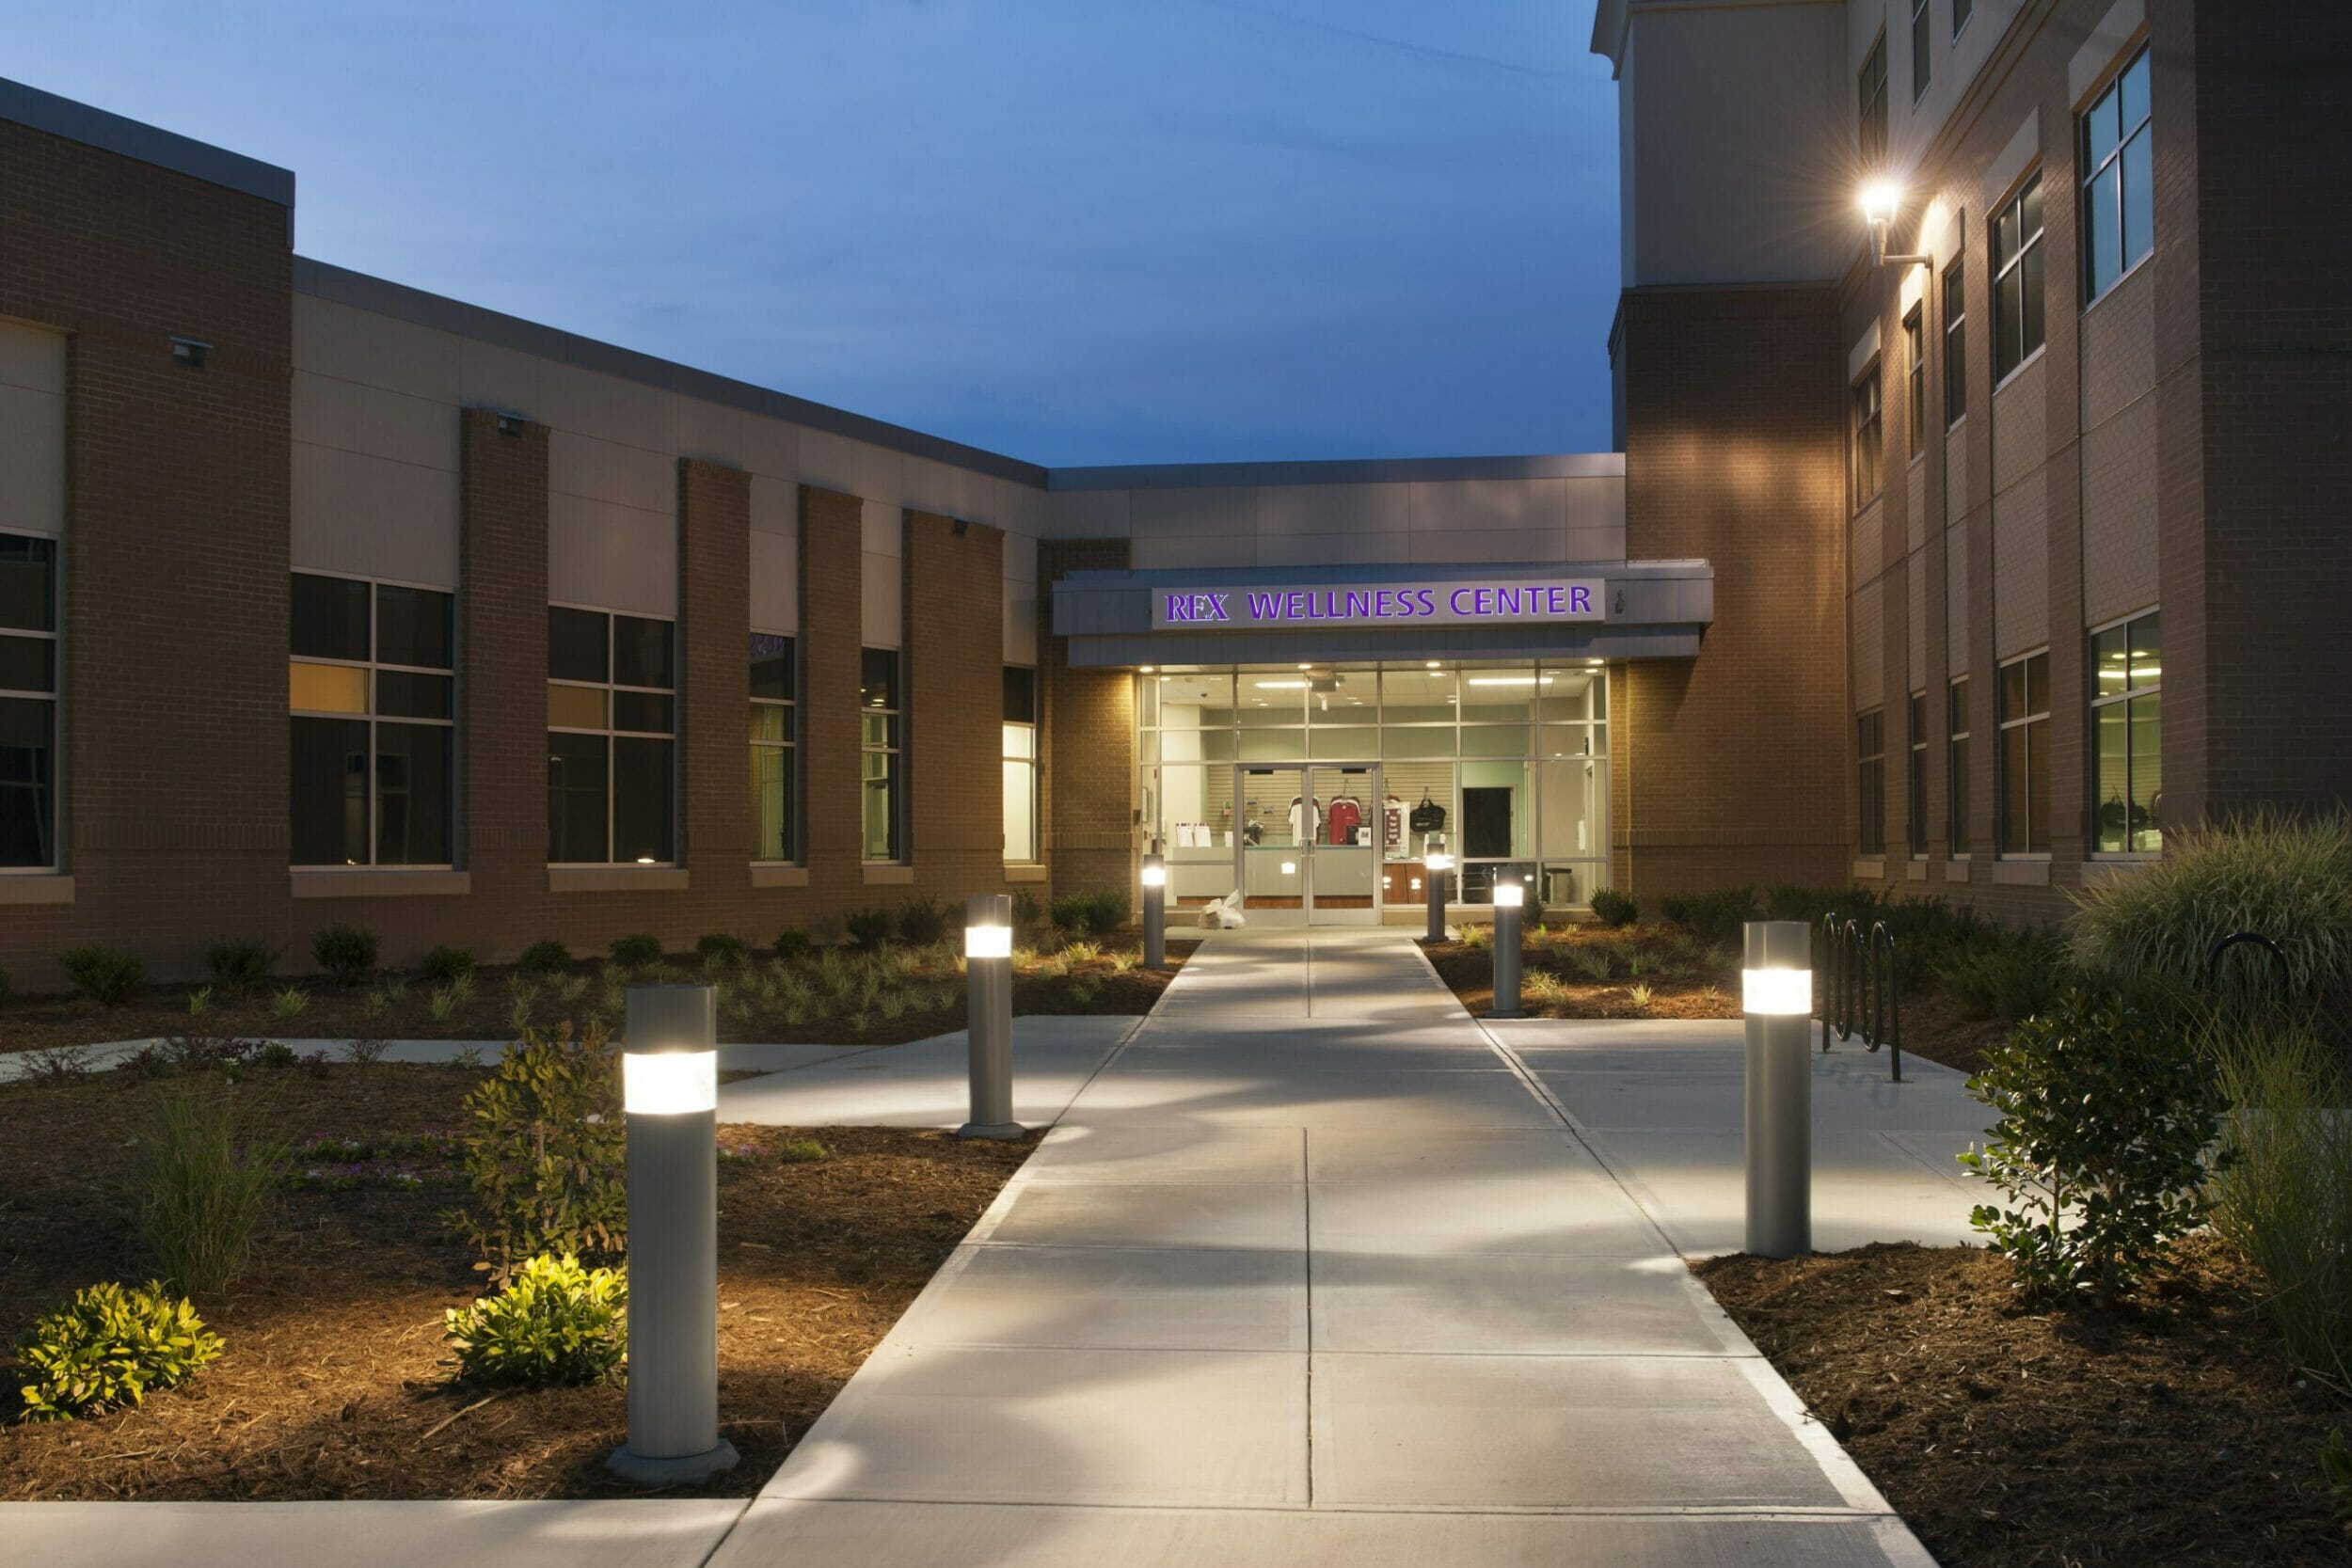 Exterior view of REX wellness center at night with lights leading up to the glass, front door